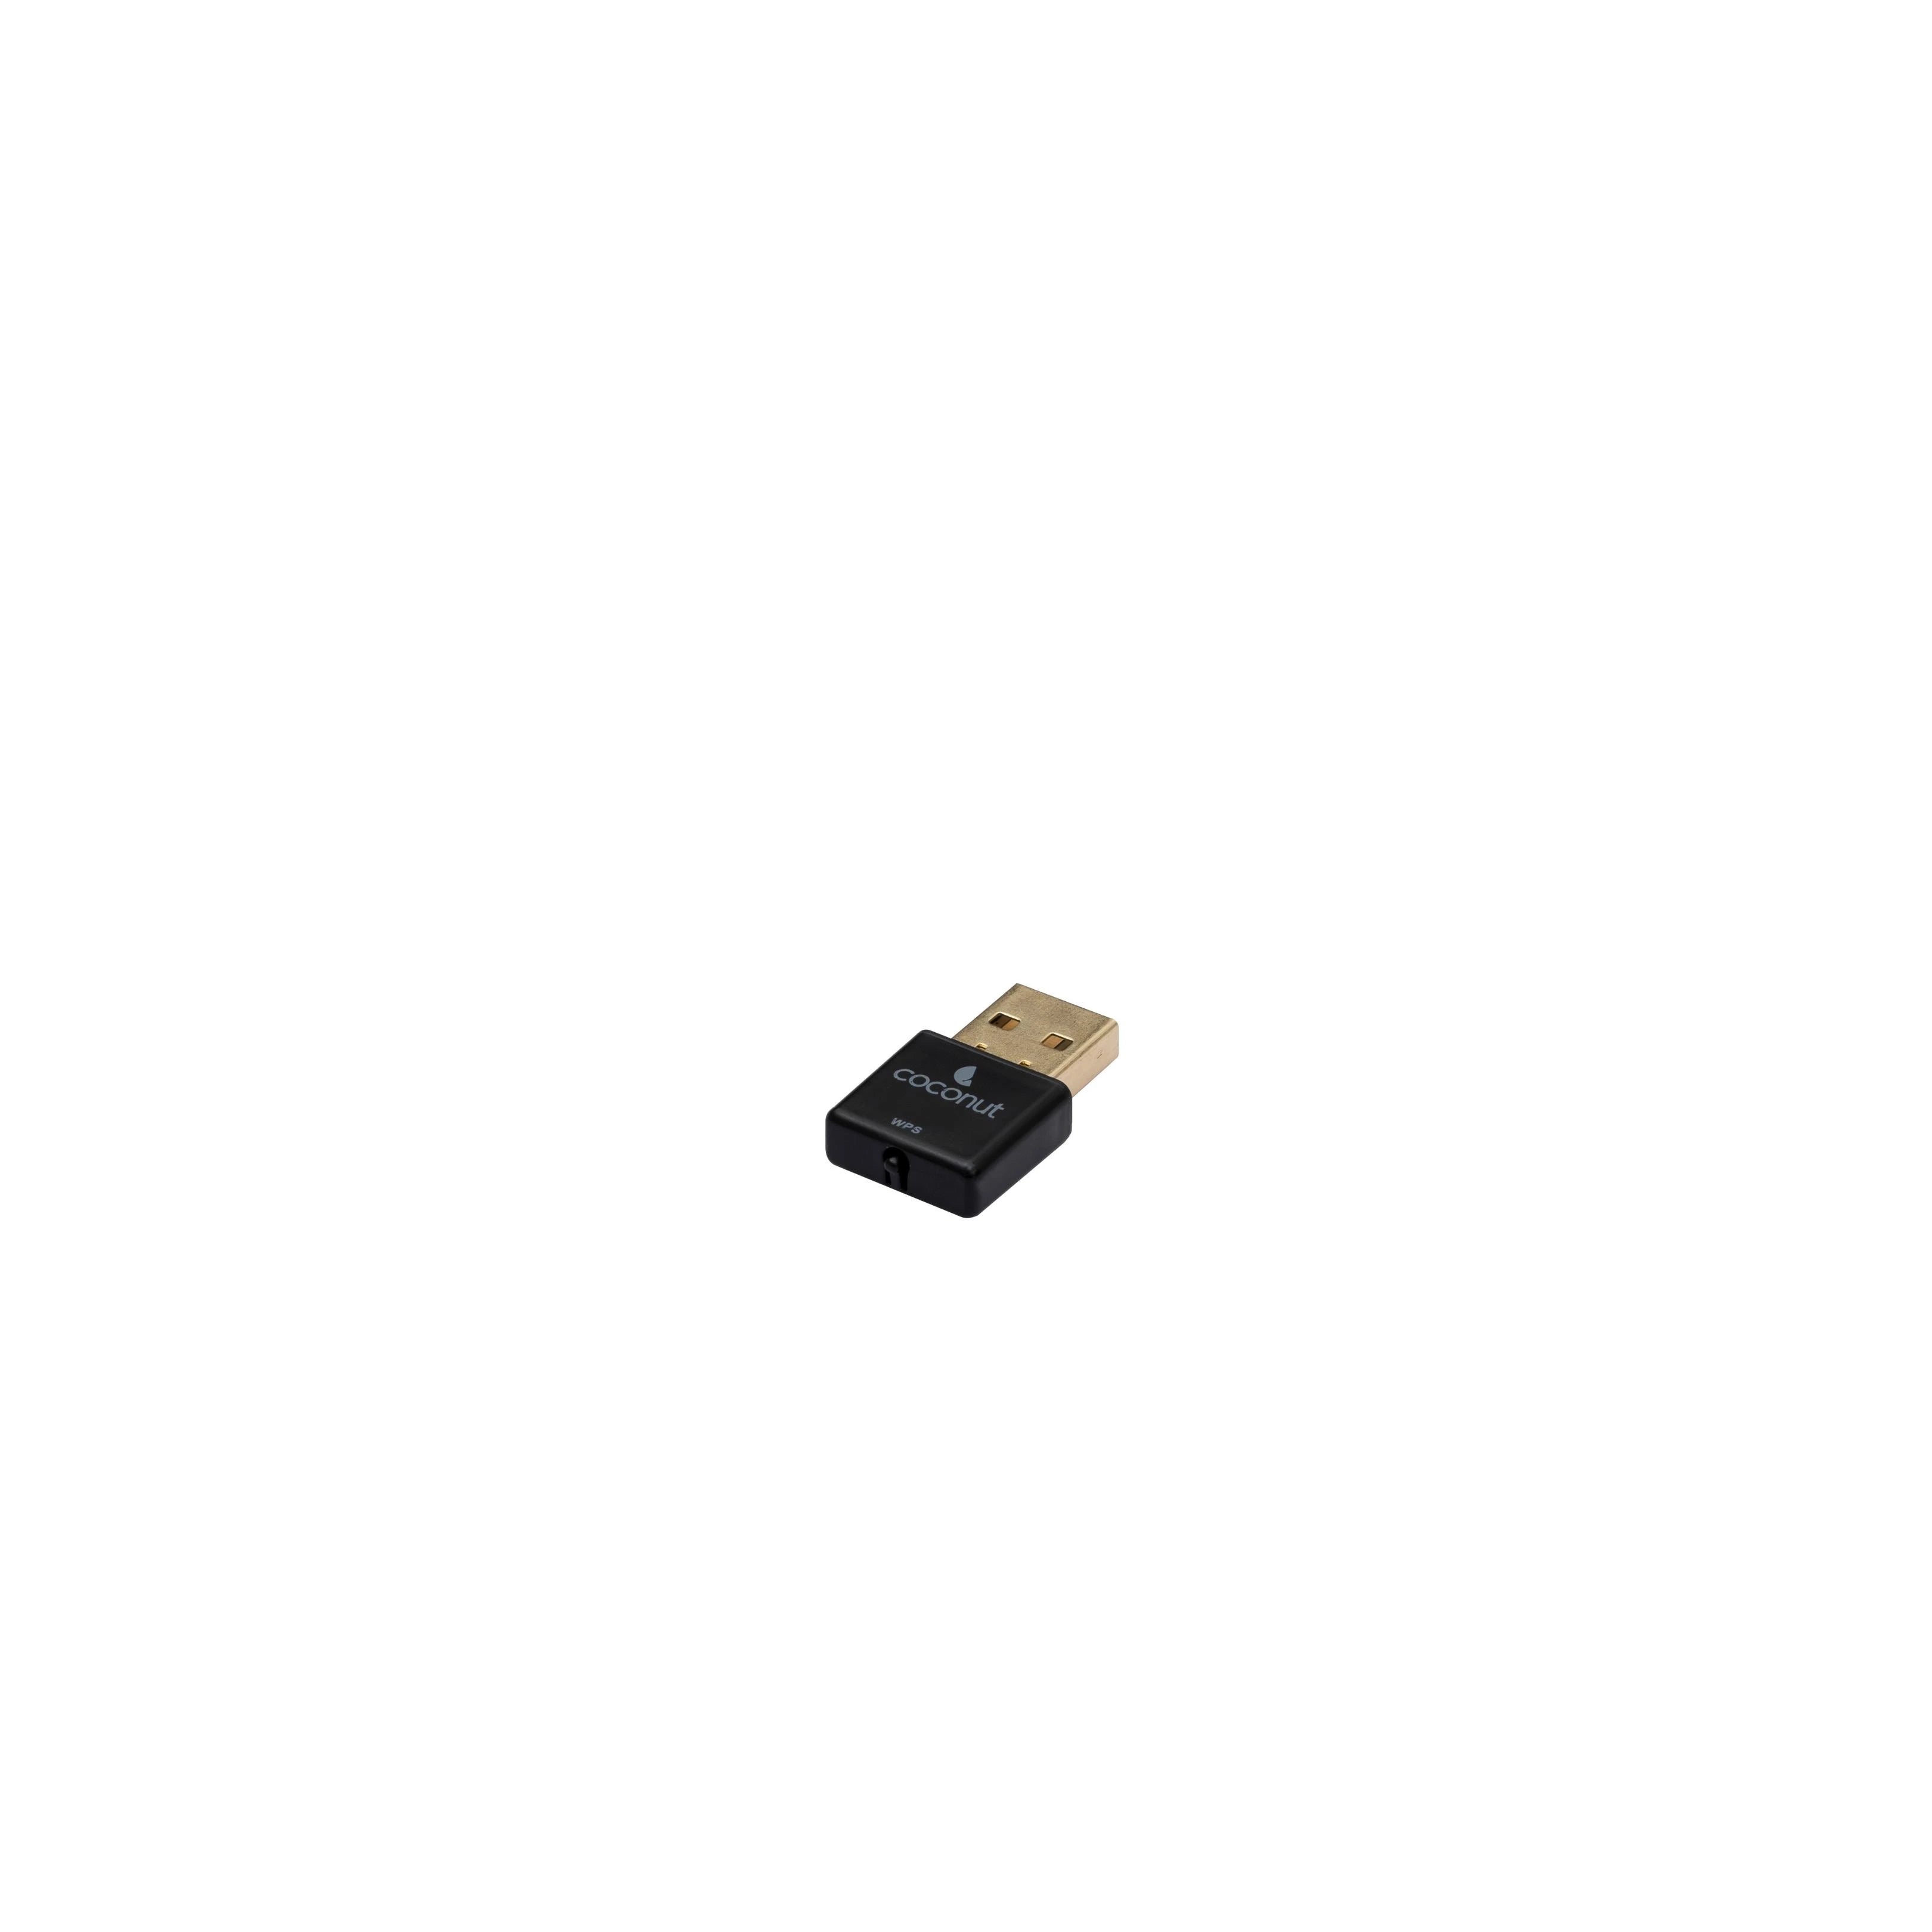 WA01 Superspeed Wifi Adapter with WPS, 300mbps